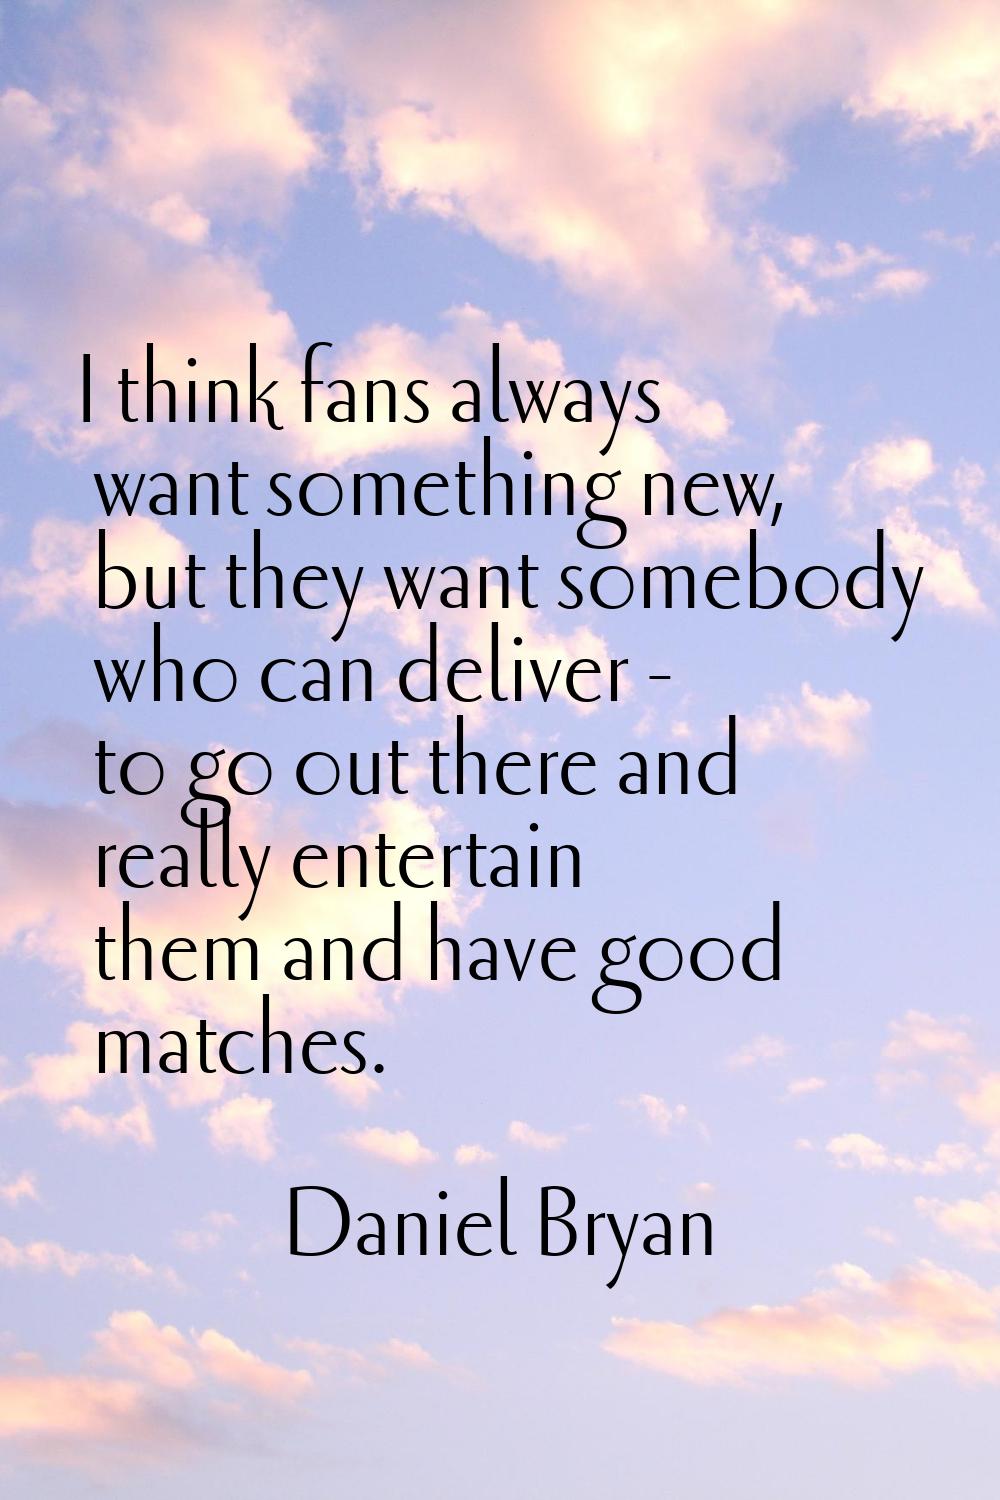 I think fans always want something new, but they want somebody who can deliver - to go out there an